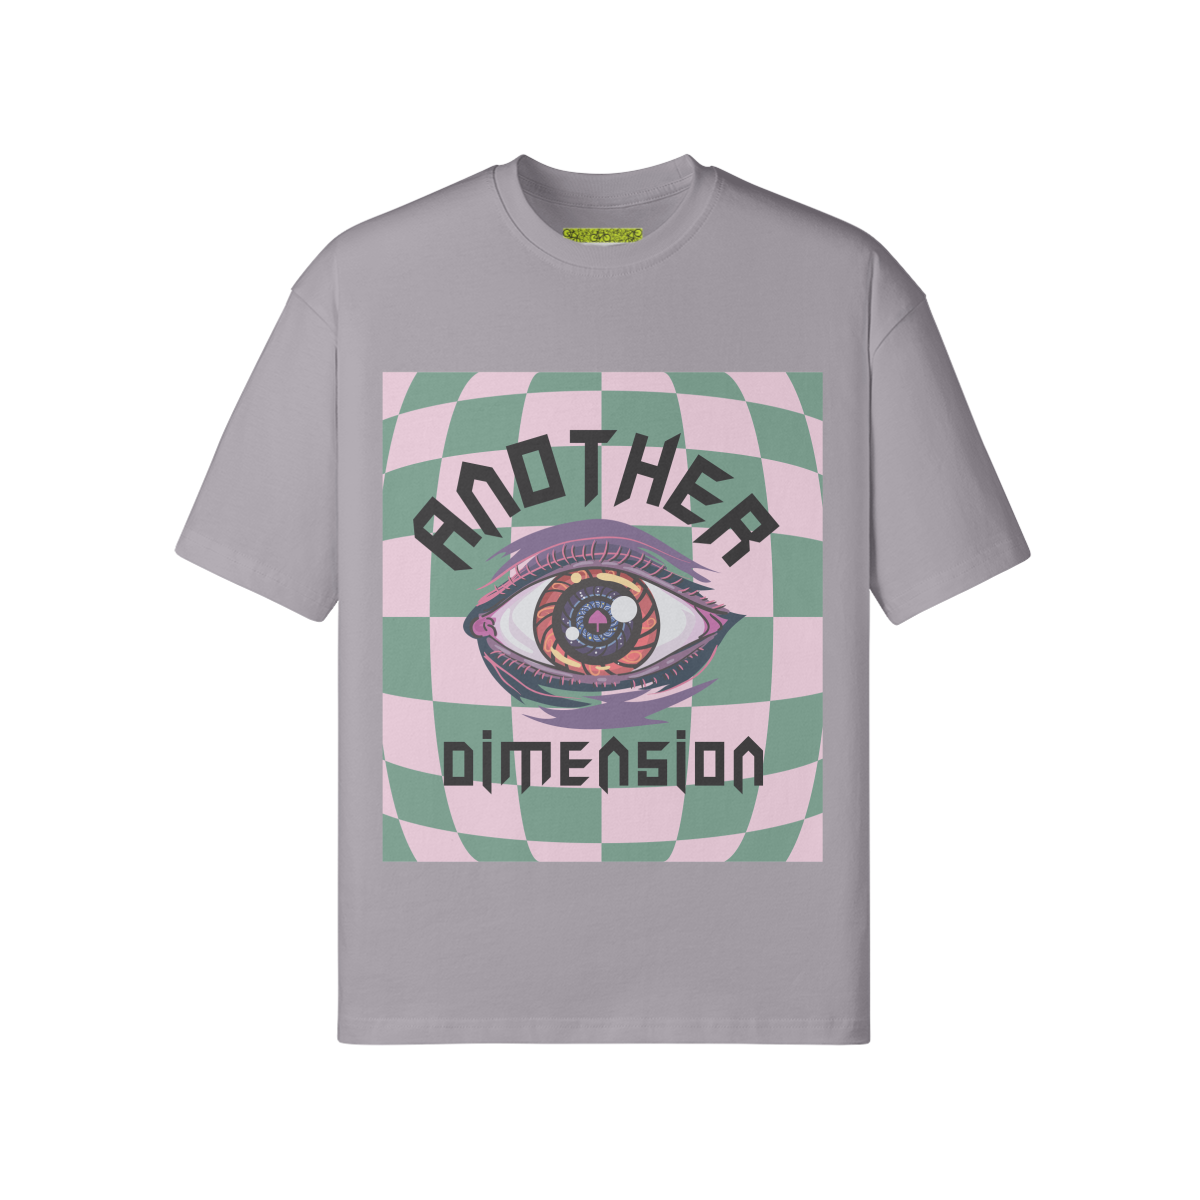 ANOTHER DIMENSION - Unisex Loose T-shirt - light gray